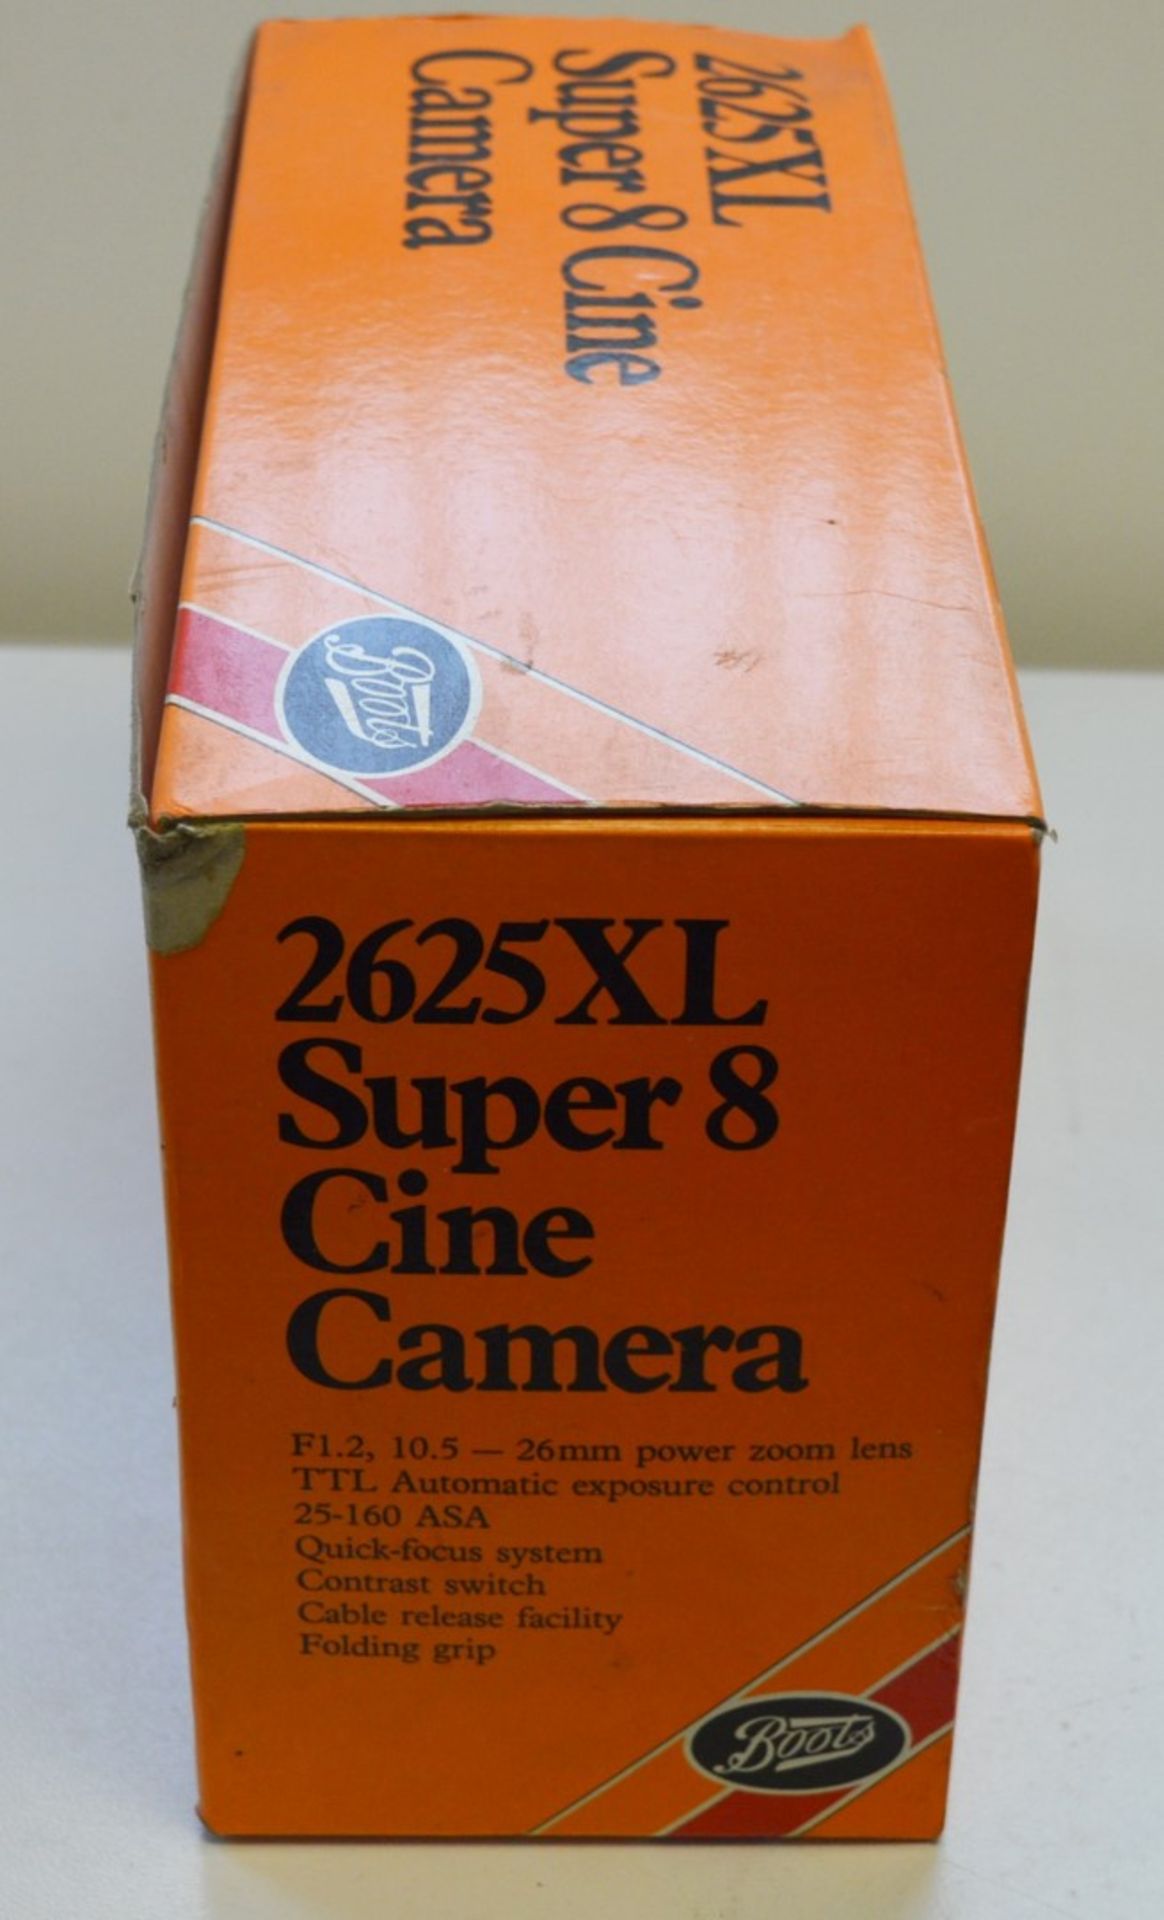 1 x Vintage Boots 2625XL Super 8 Cine Camera - Boxed With Original Poly Inserts  - Great - Image 2 of 6